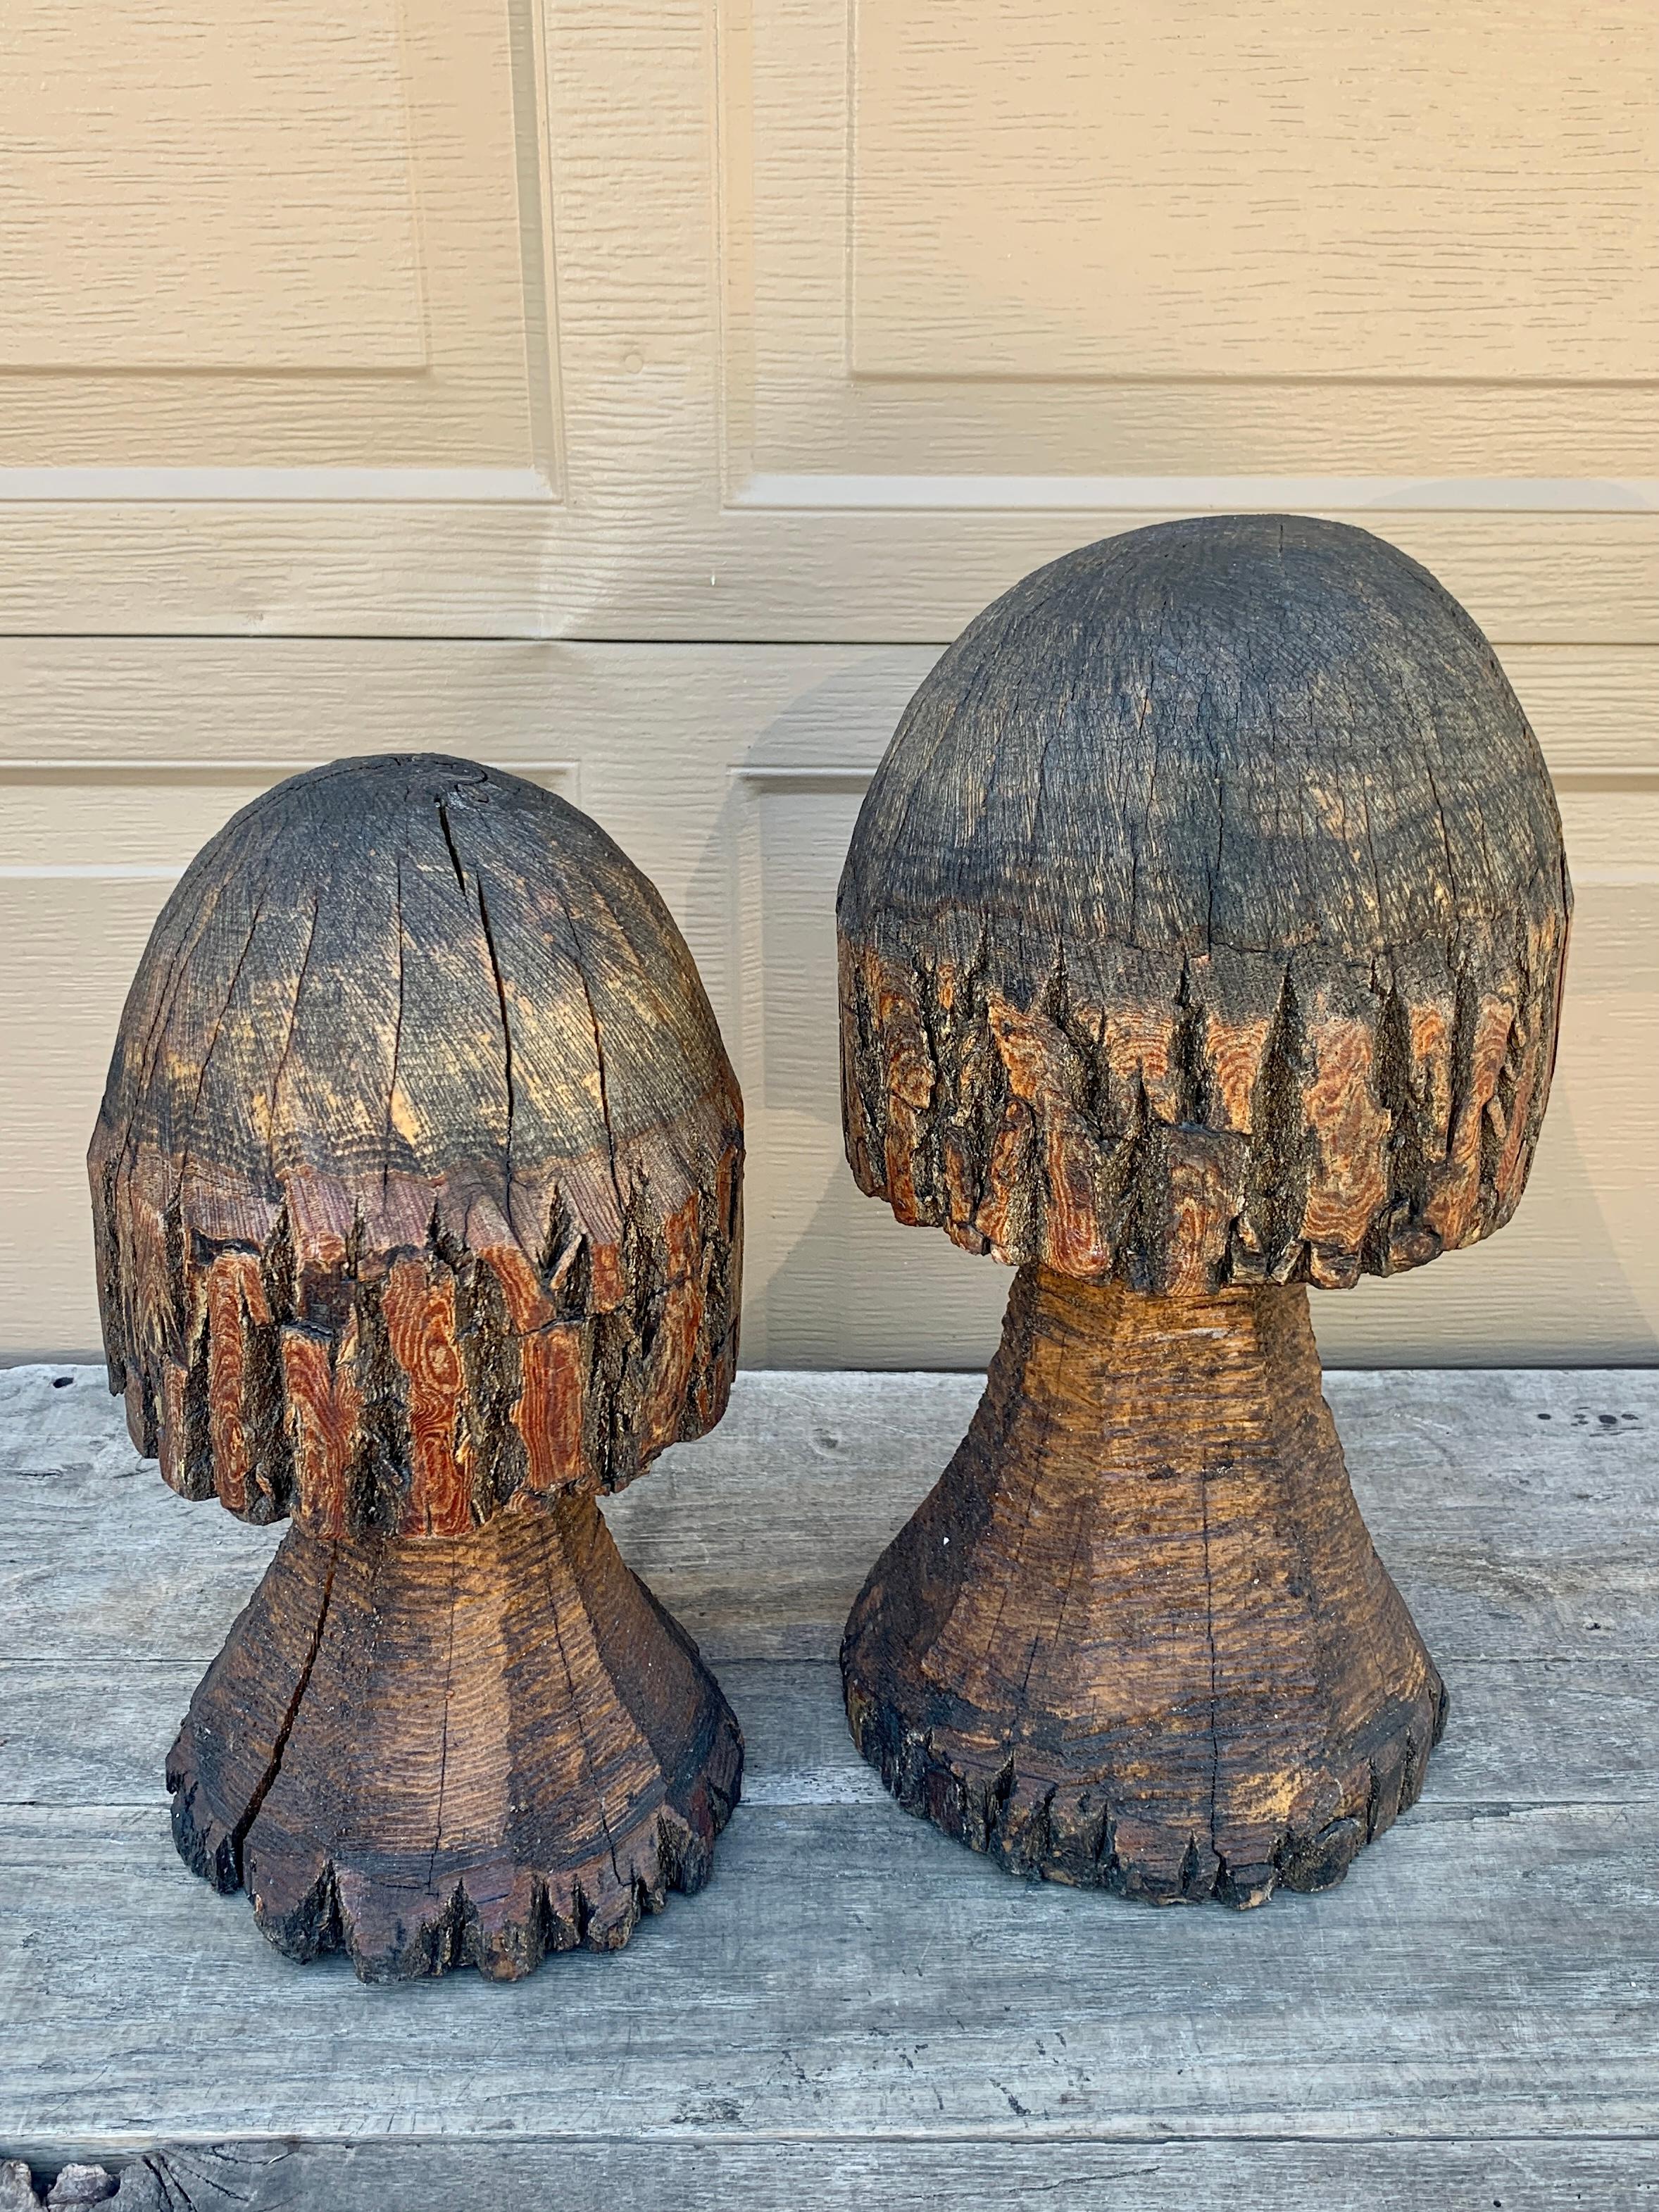 A beautiful and unique pair of vintage hand carved natural oak mushroom statues. These would be perfect for a country house, indoors or outdoors! They could grace a mantel or hearth or be a beautiful accent in the garden or on the porch.

USA,